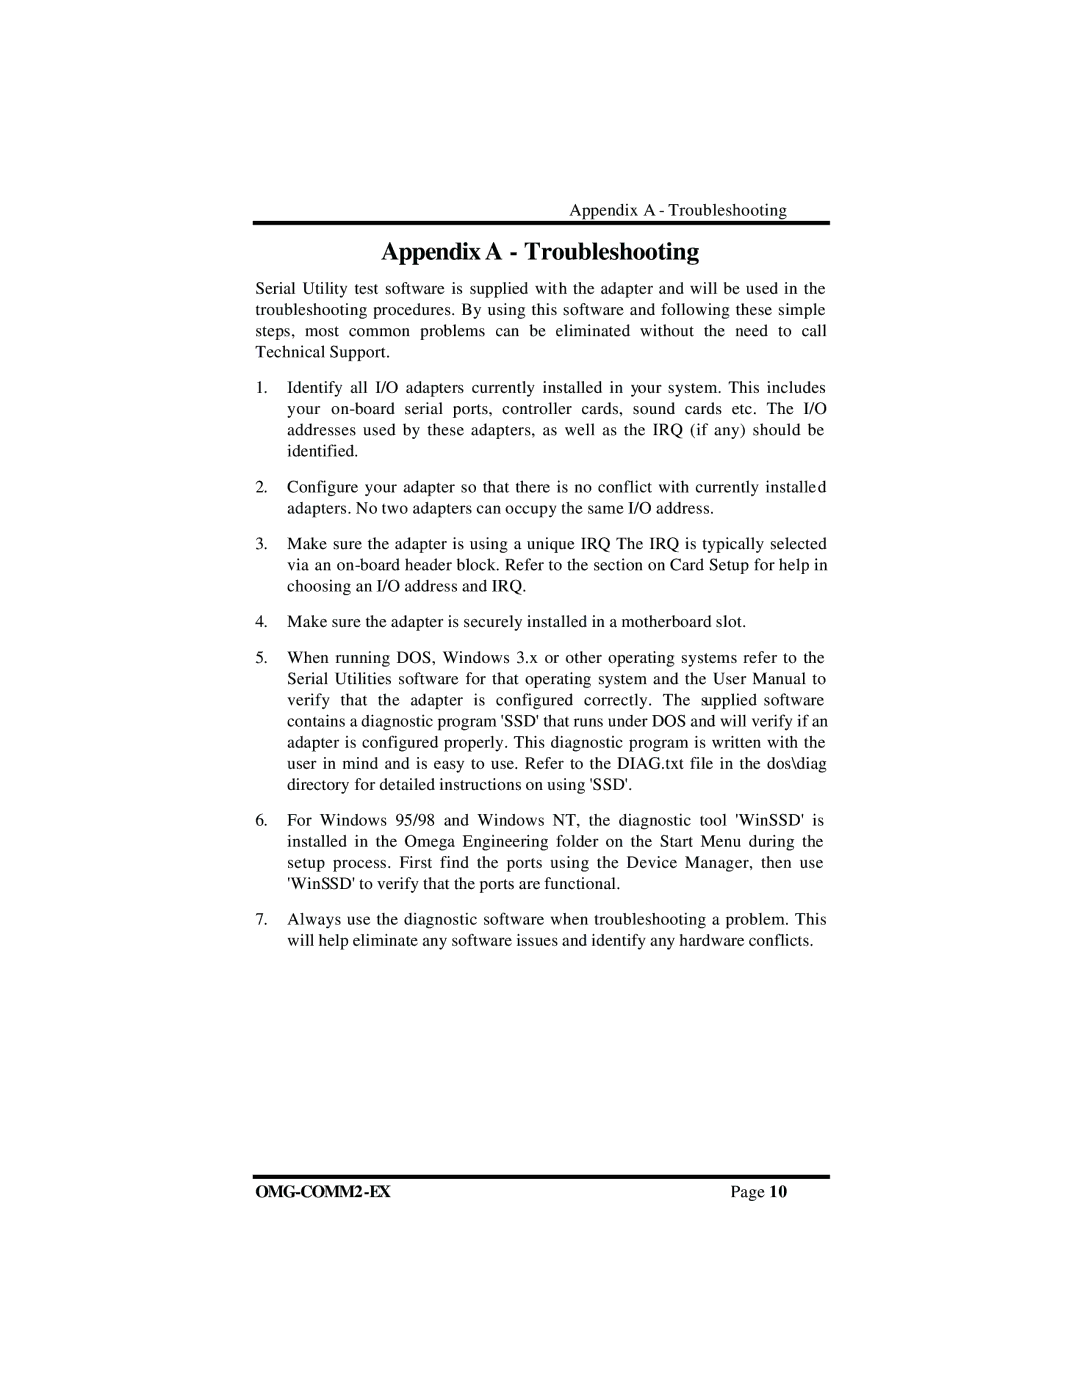 Omega Vehicle Security OMG-COMM2-EX manual Appendix a Troubleshooting 